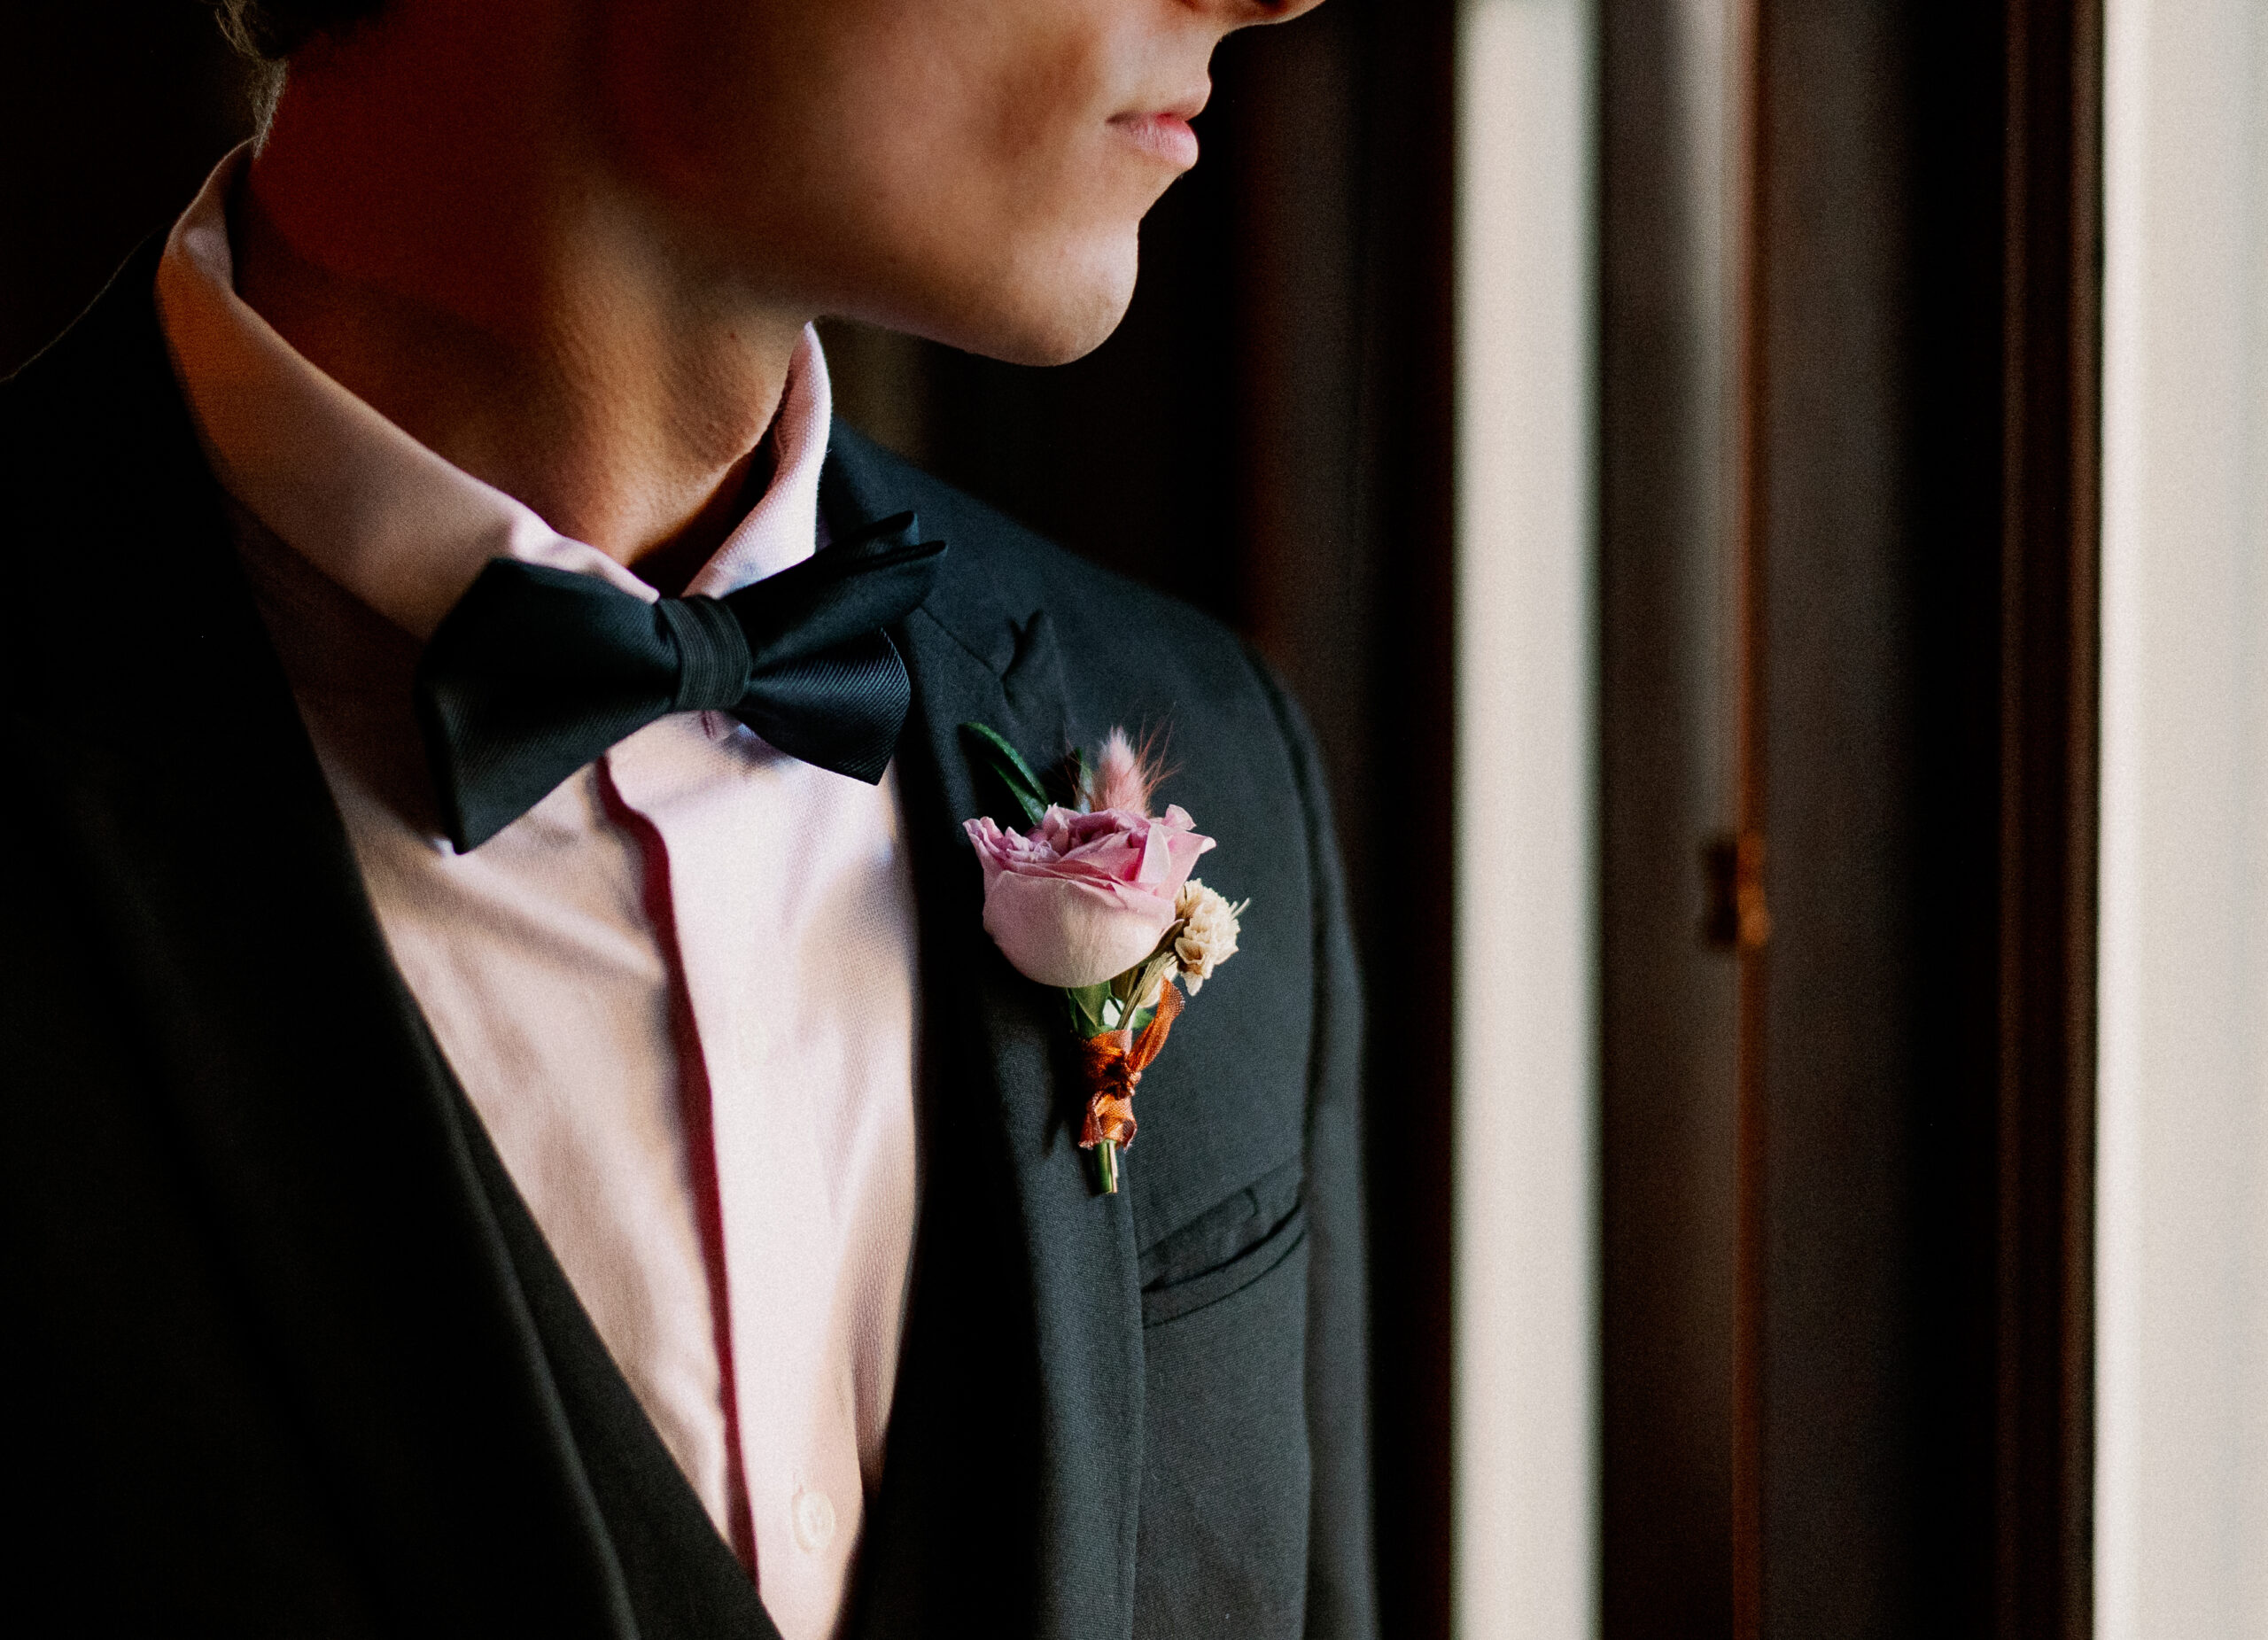 Groom Wearing Black Tuxedo and Bowtie, Pink Dress Shirt, Pink Rose Boutonniere | Tampa Bay Wedding Photographer Dewitt for Love